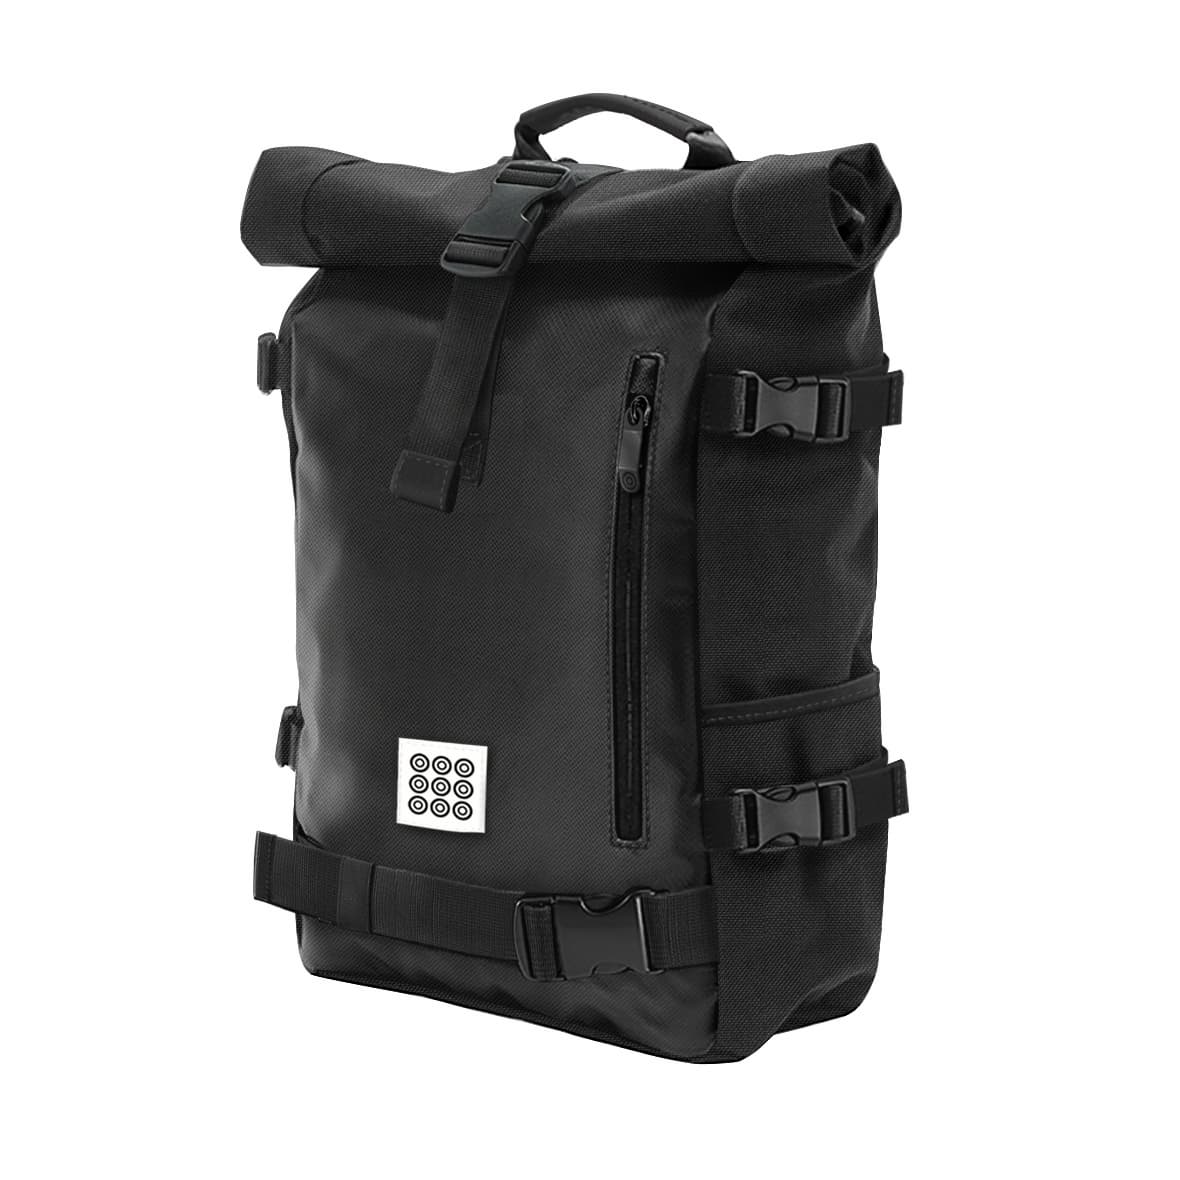 Onebody Laptop Backpack Bag_07 for Travel Business Casual